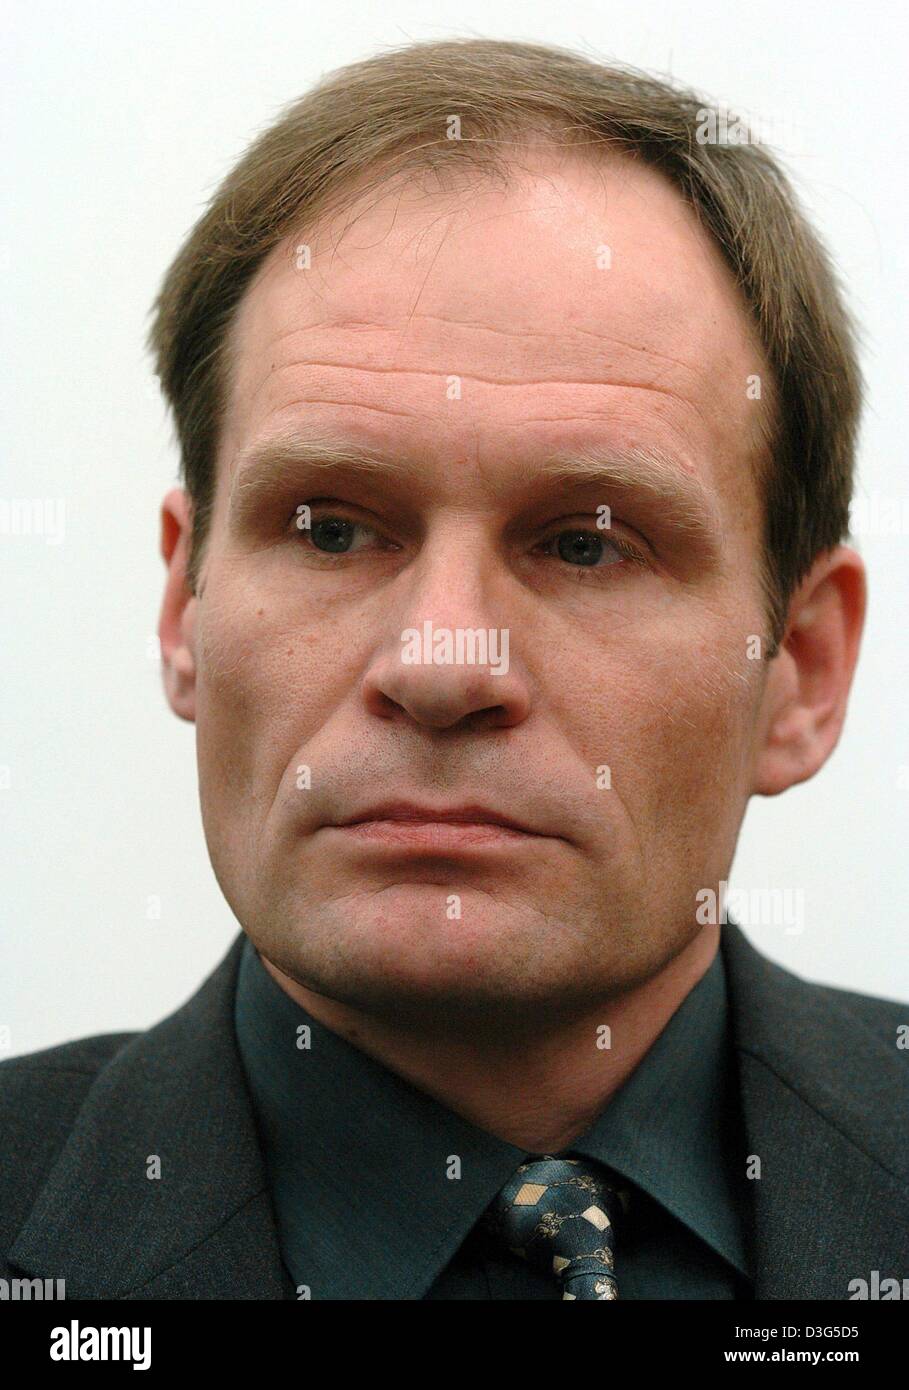 (dpa) - Armin Meiwes (R), accused of cannibalism, sits in the regional court in Kassel, Germany, 3 December 2003. The trial of the man who killed and then ate his victim before a running camera began in Kassel in what legal experts say is an unprecedented case for Germany. The defendant, 42-year-old Armin Meiwes, is answering a charge of murder, while his defence counsel will seek  Stock Photo